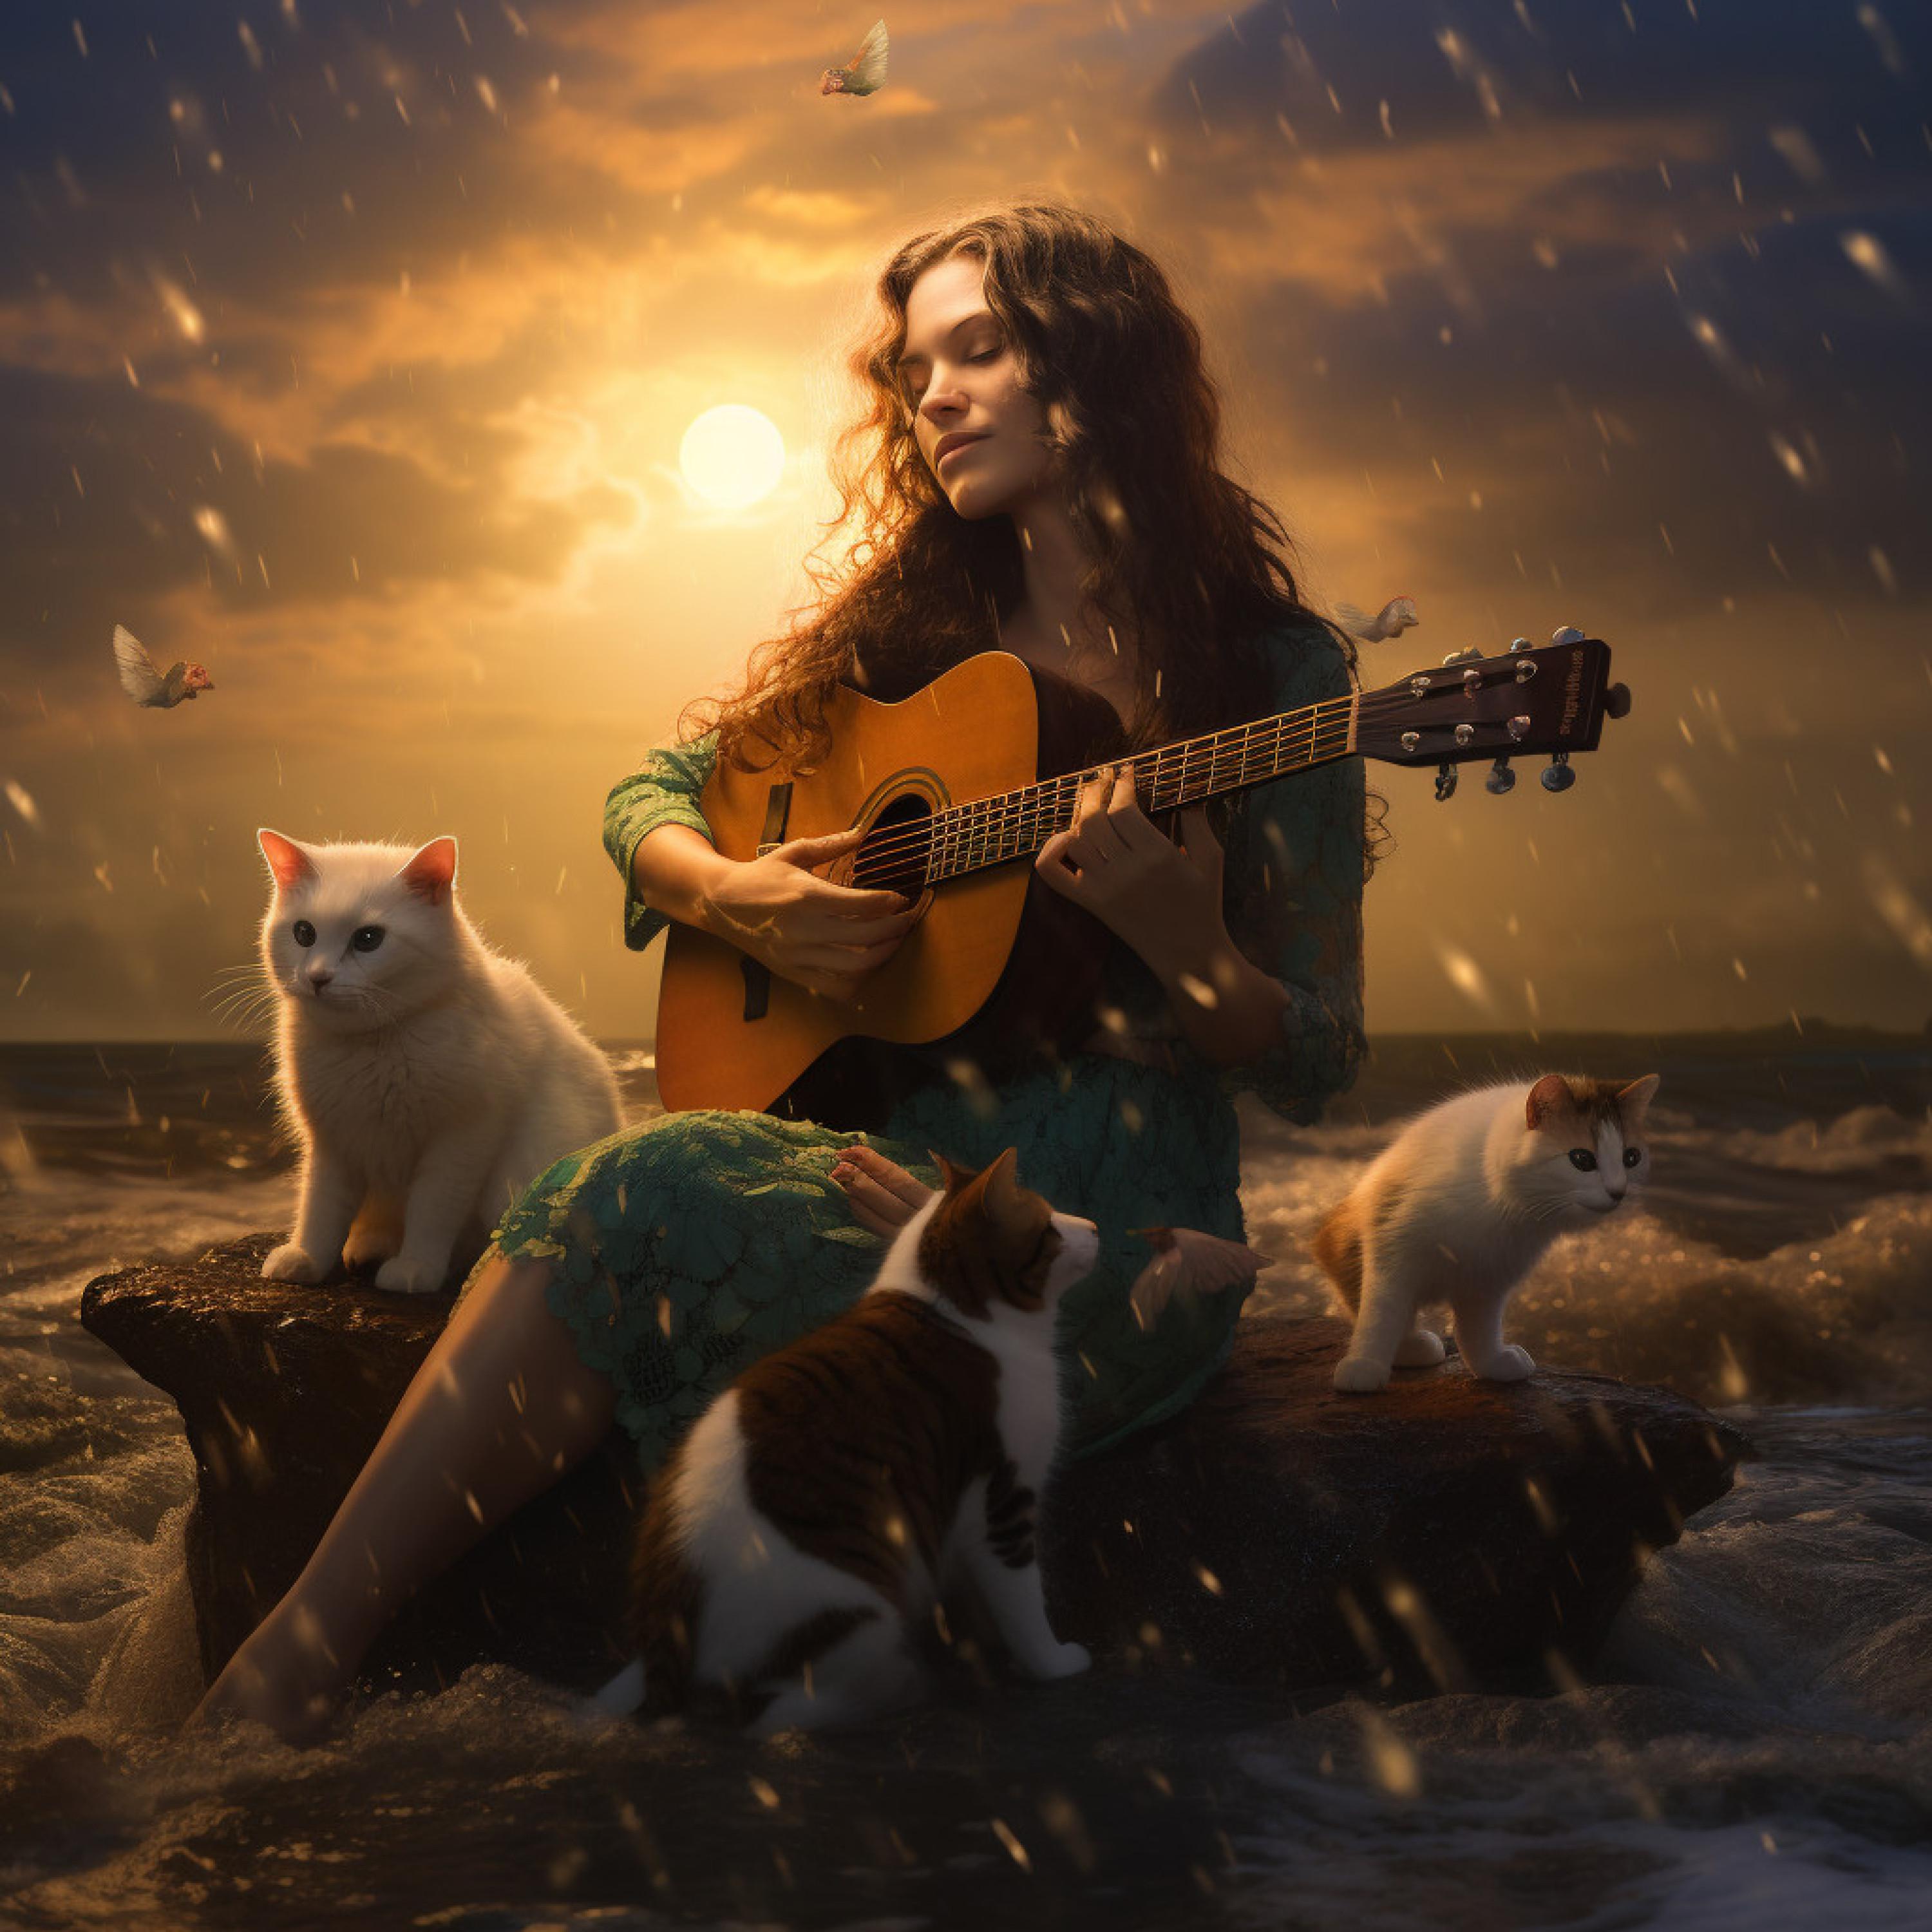 Mother Nature Soundscapes - Harmony with Rainy Cats